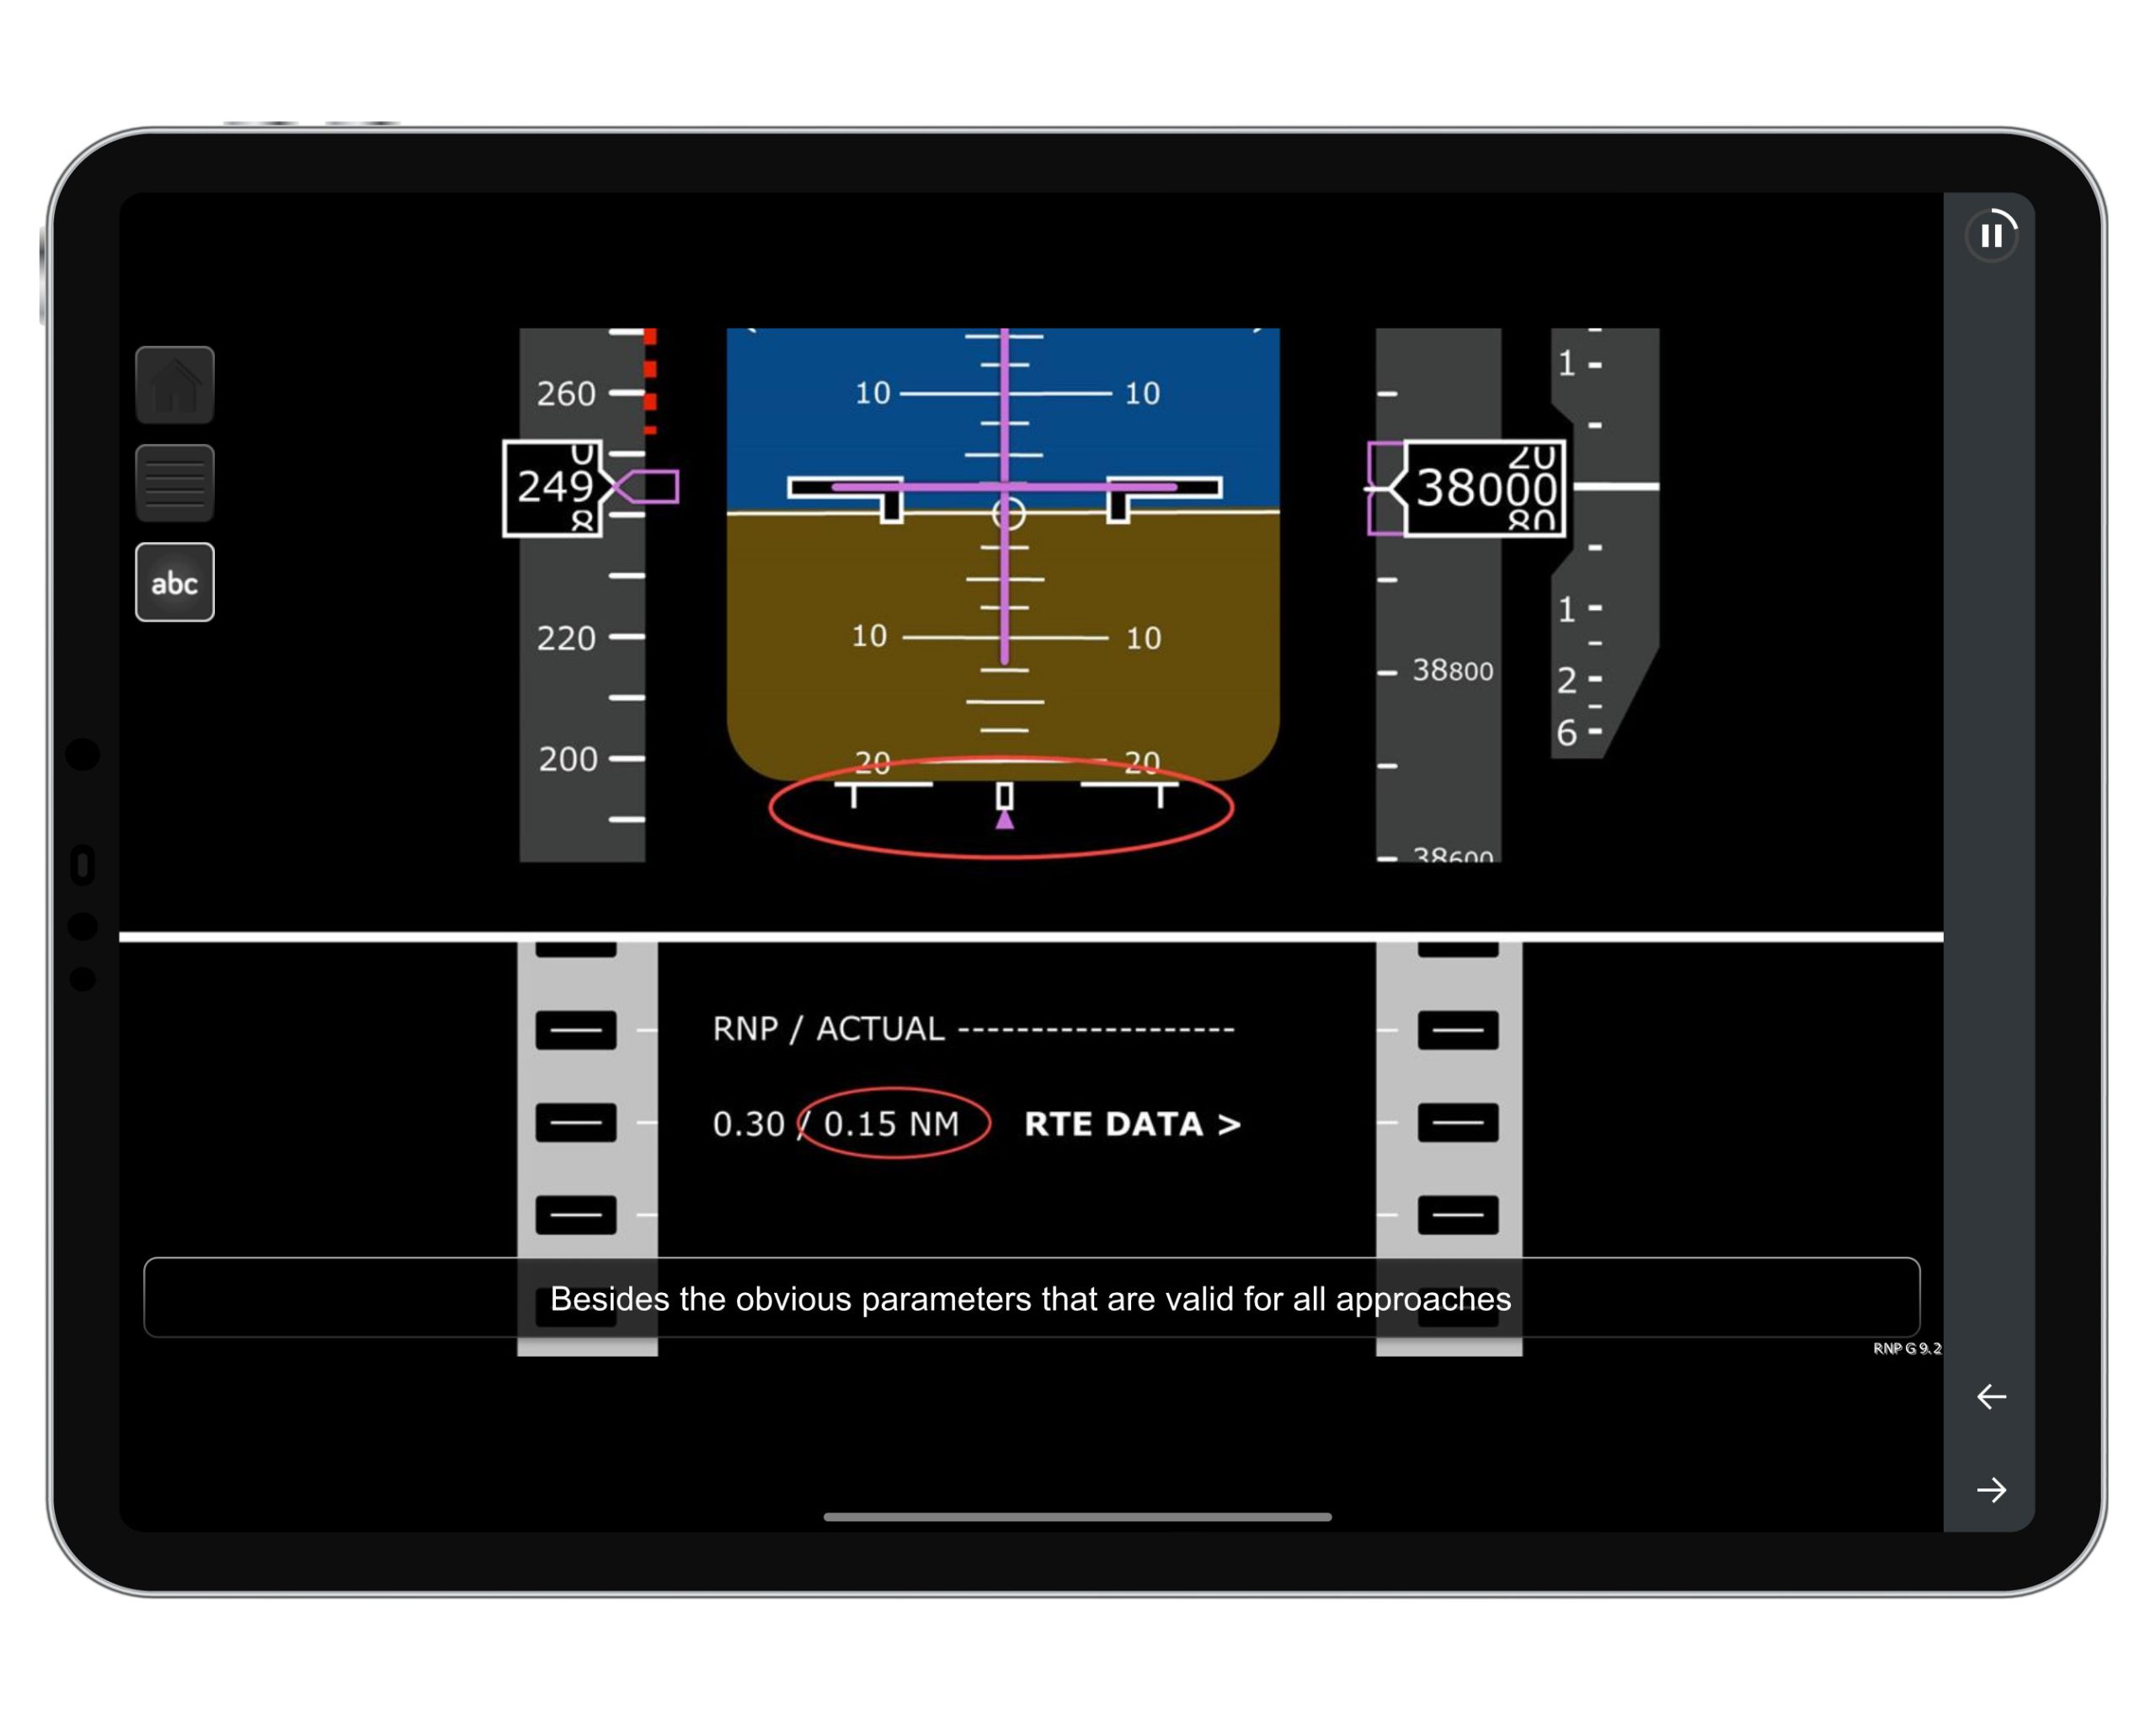 Screenshot showing Required Navigation Performance course for the airline flight crew and flight instructors.